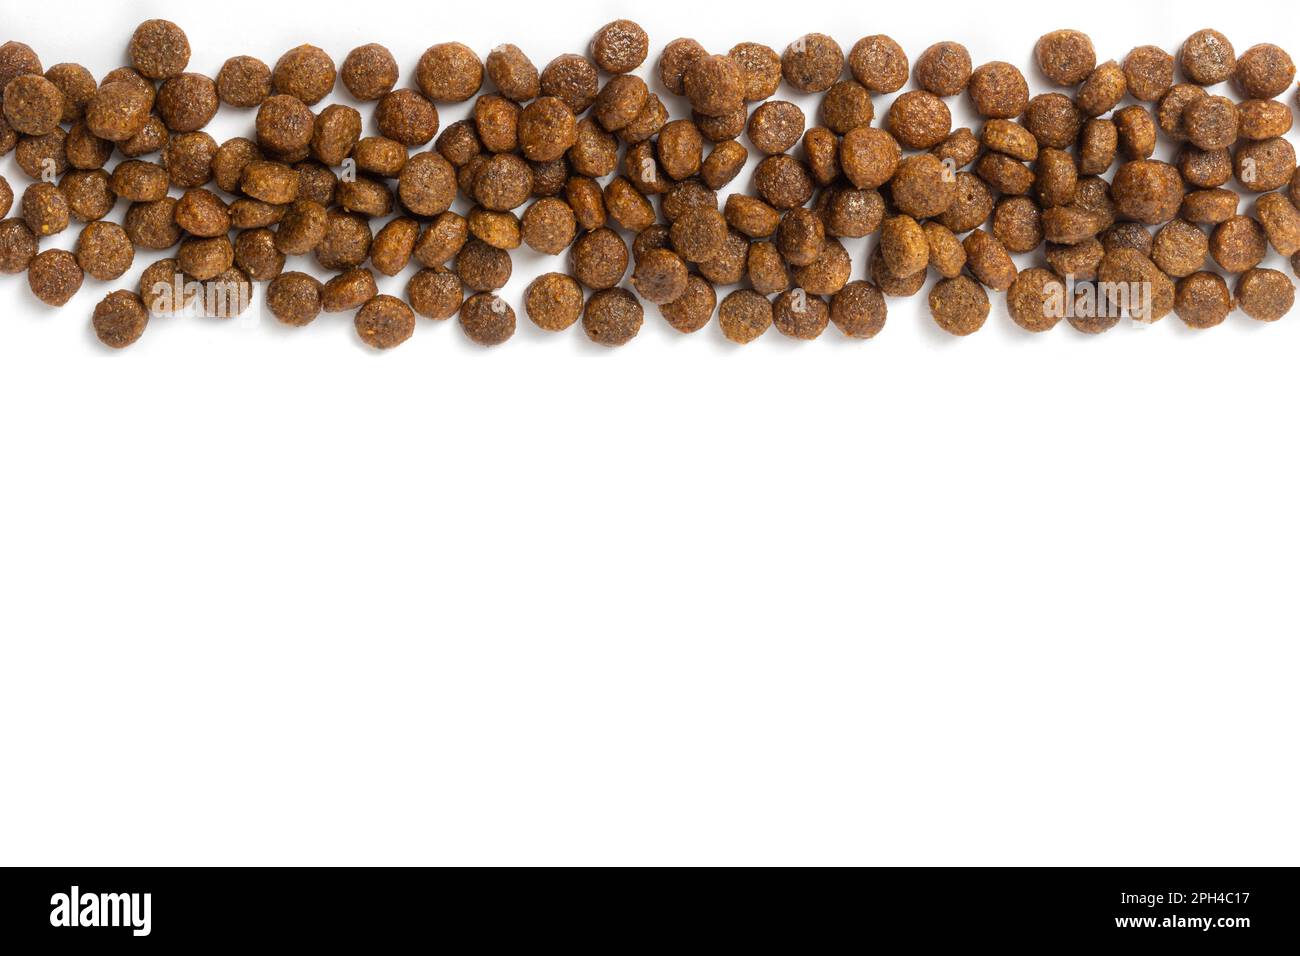 Dry pet food background. Pile of granulated animal feeds on white. Granules of good nutrition for dogs and cats. Stock Photo